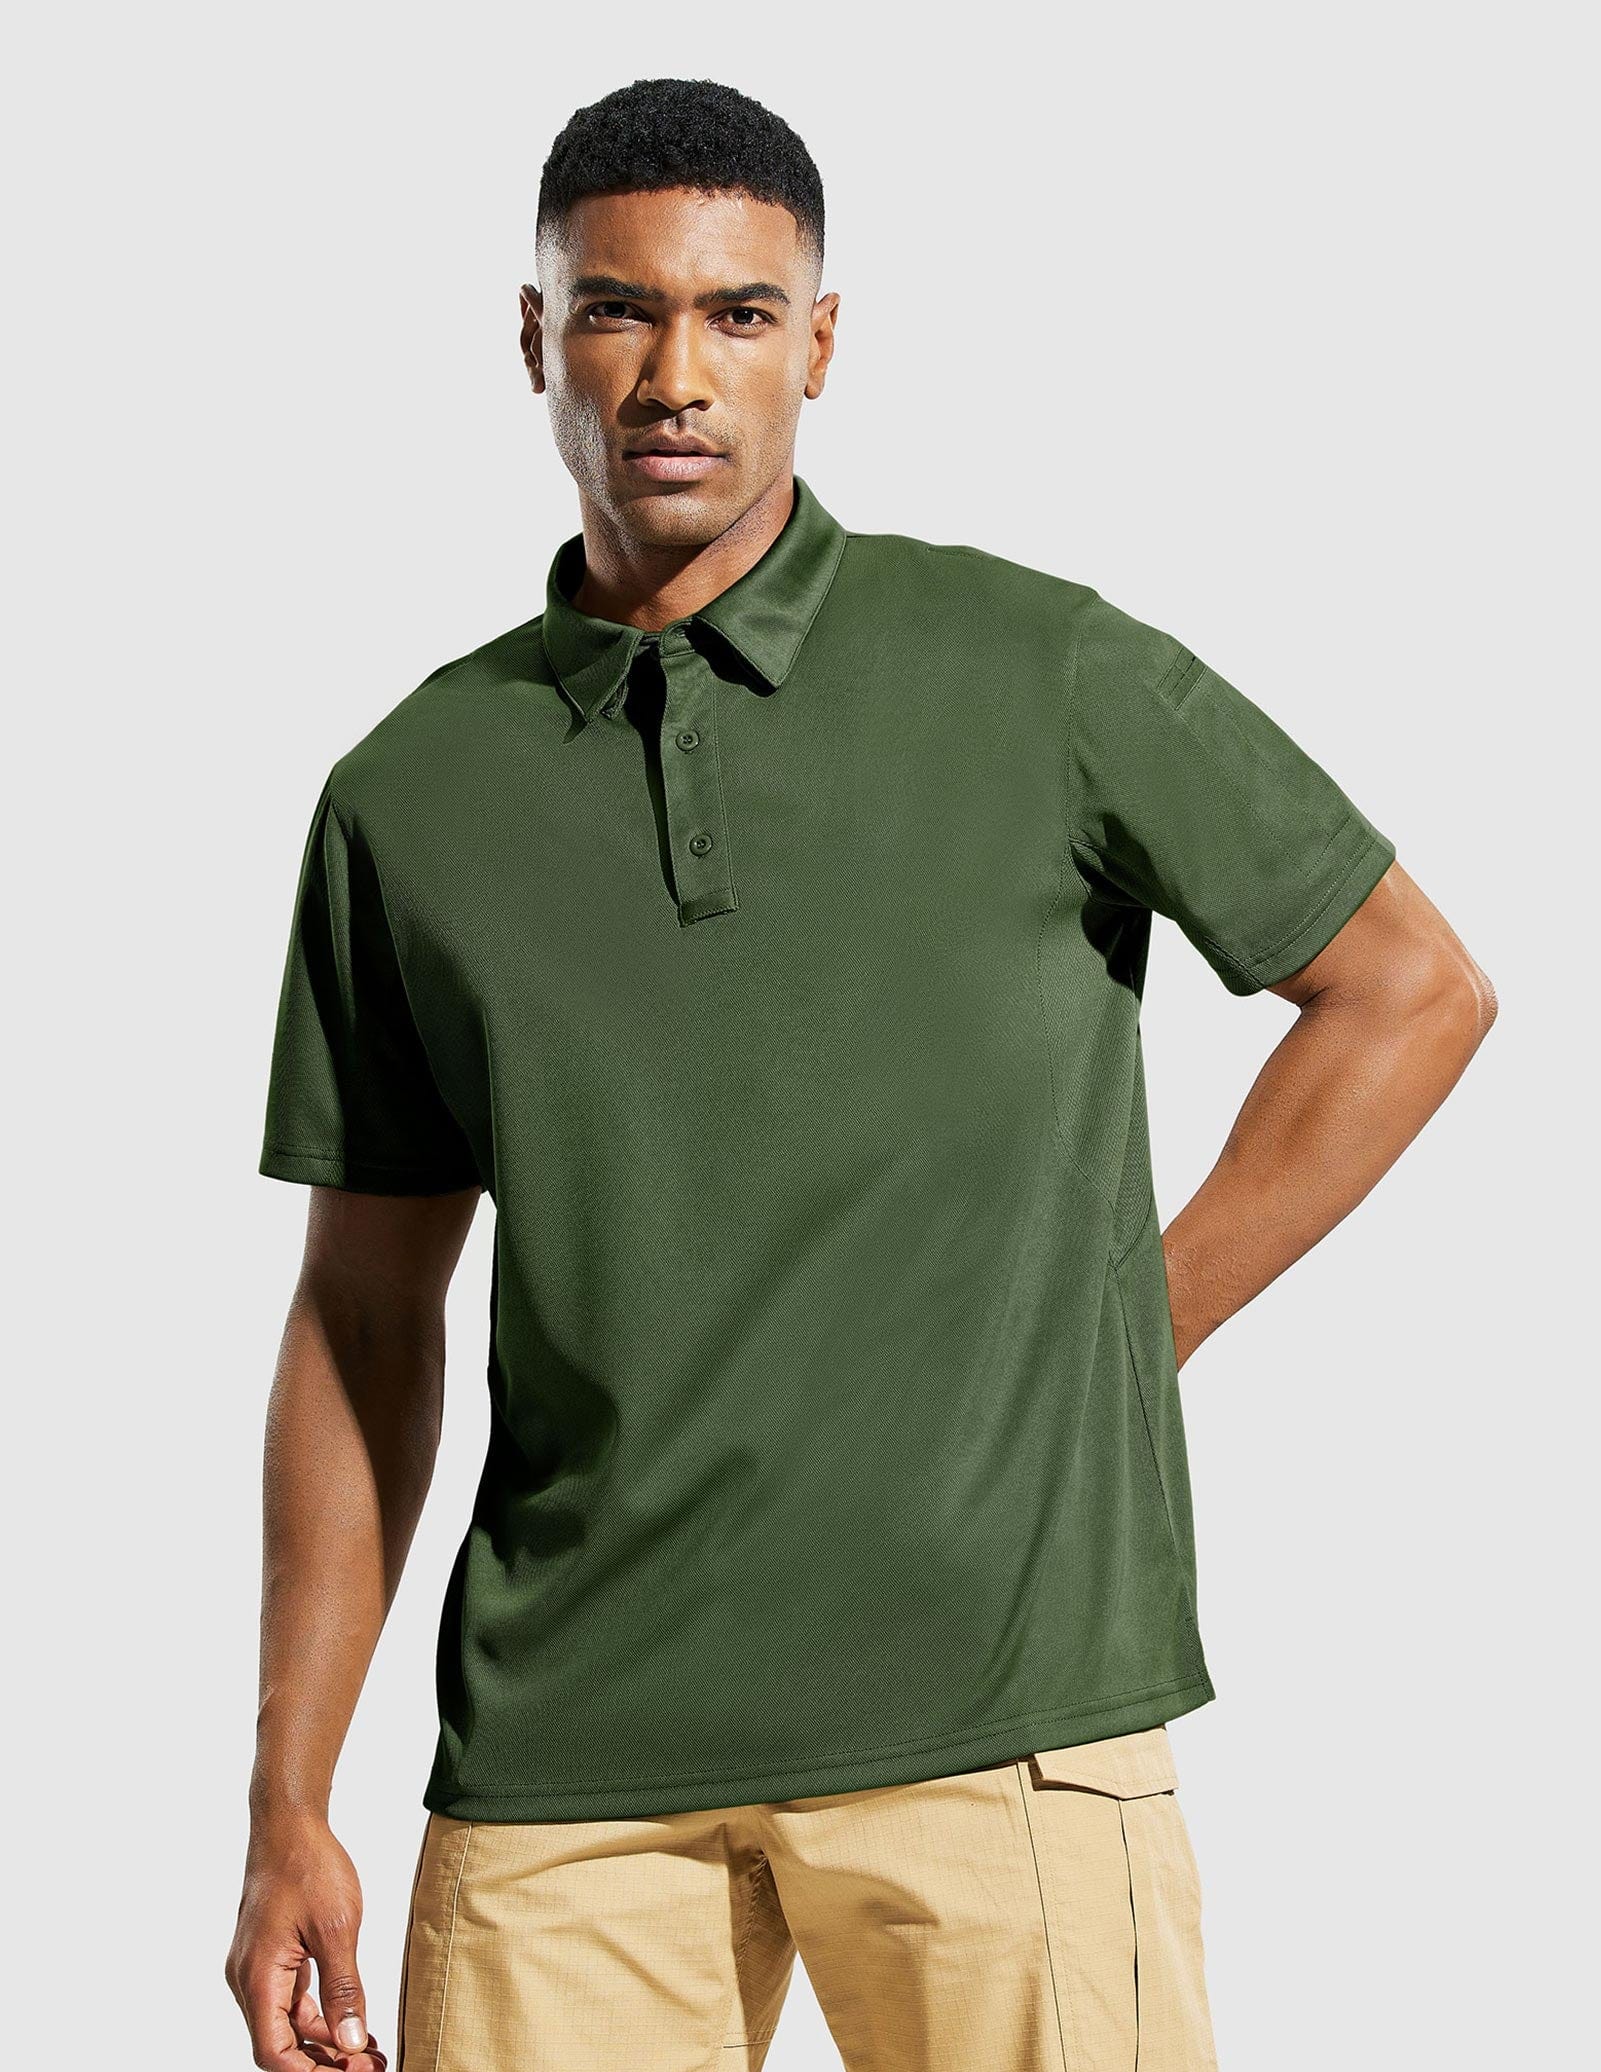 Men's Tactical Polo Shirts Outdoor Performance Collared Shirt Men Polo Olive Green / S MIER